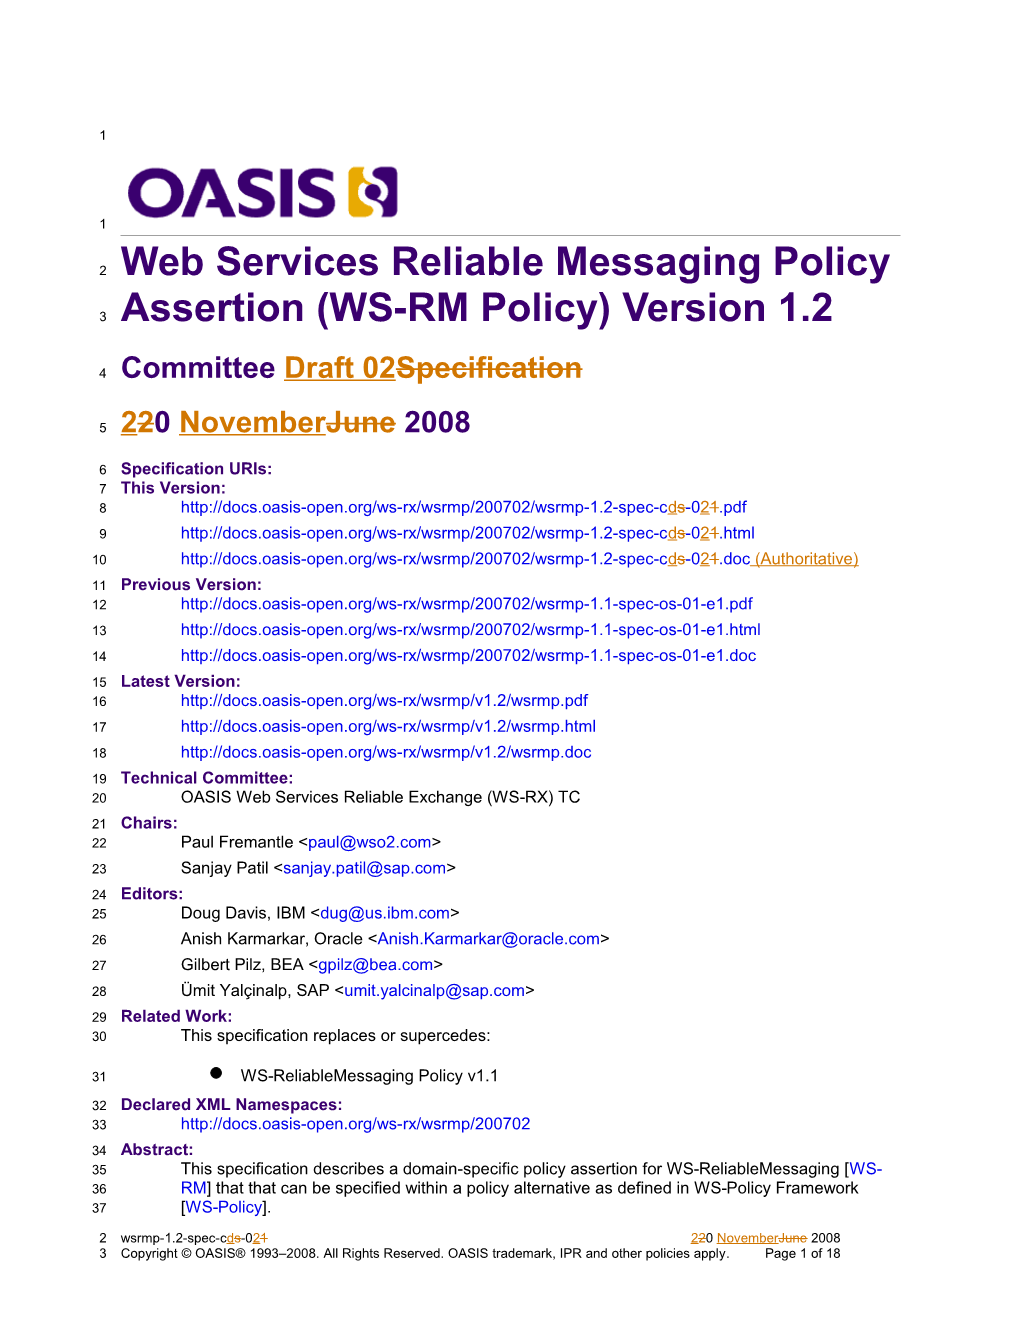 Web Services Reliablemessaging Policy Assertion (WS-RM Policy) Version 1.2